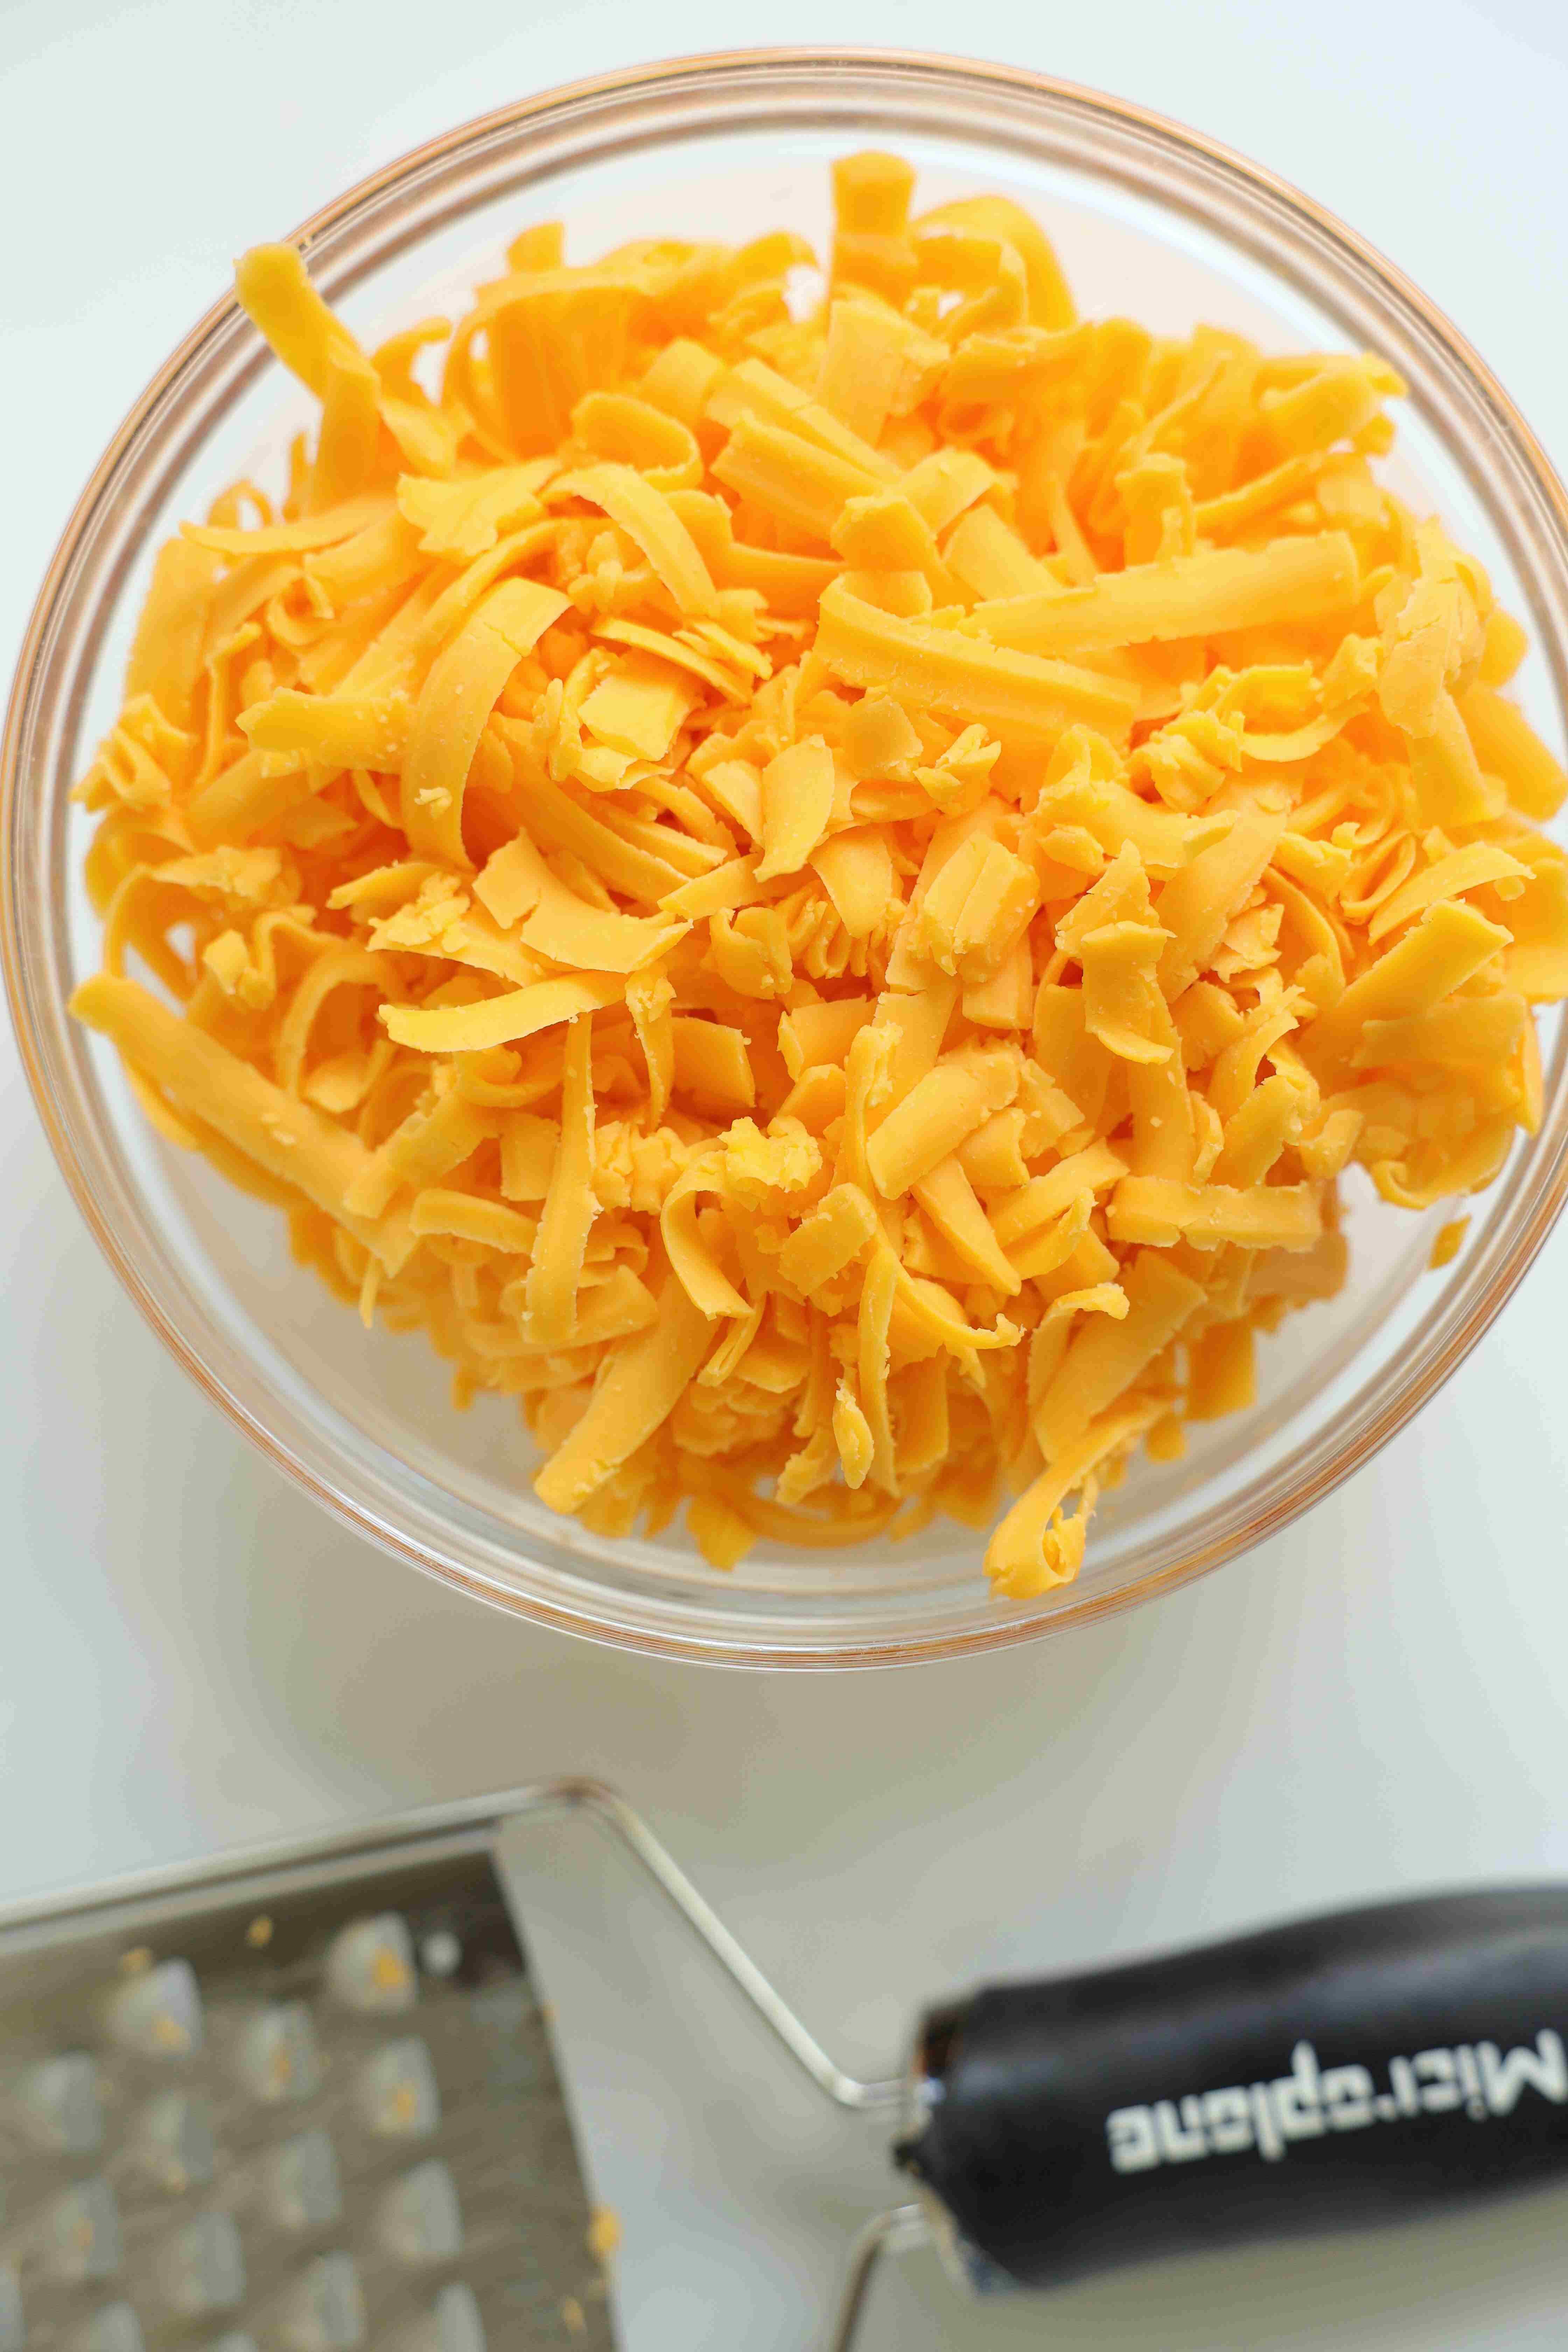 Freshly grated cheddar cheese in a clear mixing bowl next to a microplane tool.